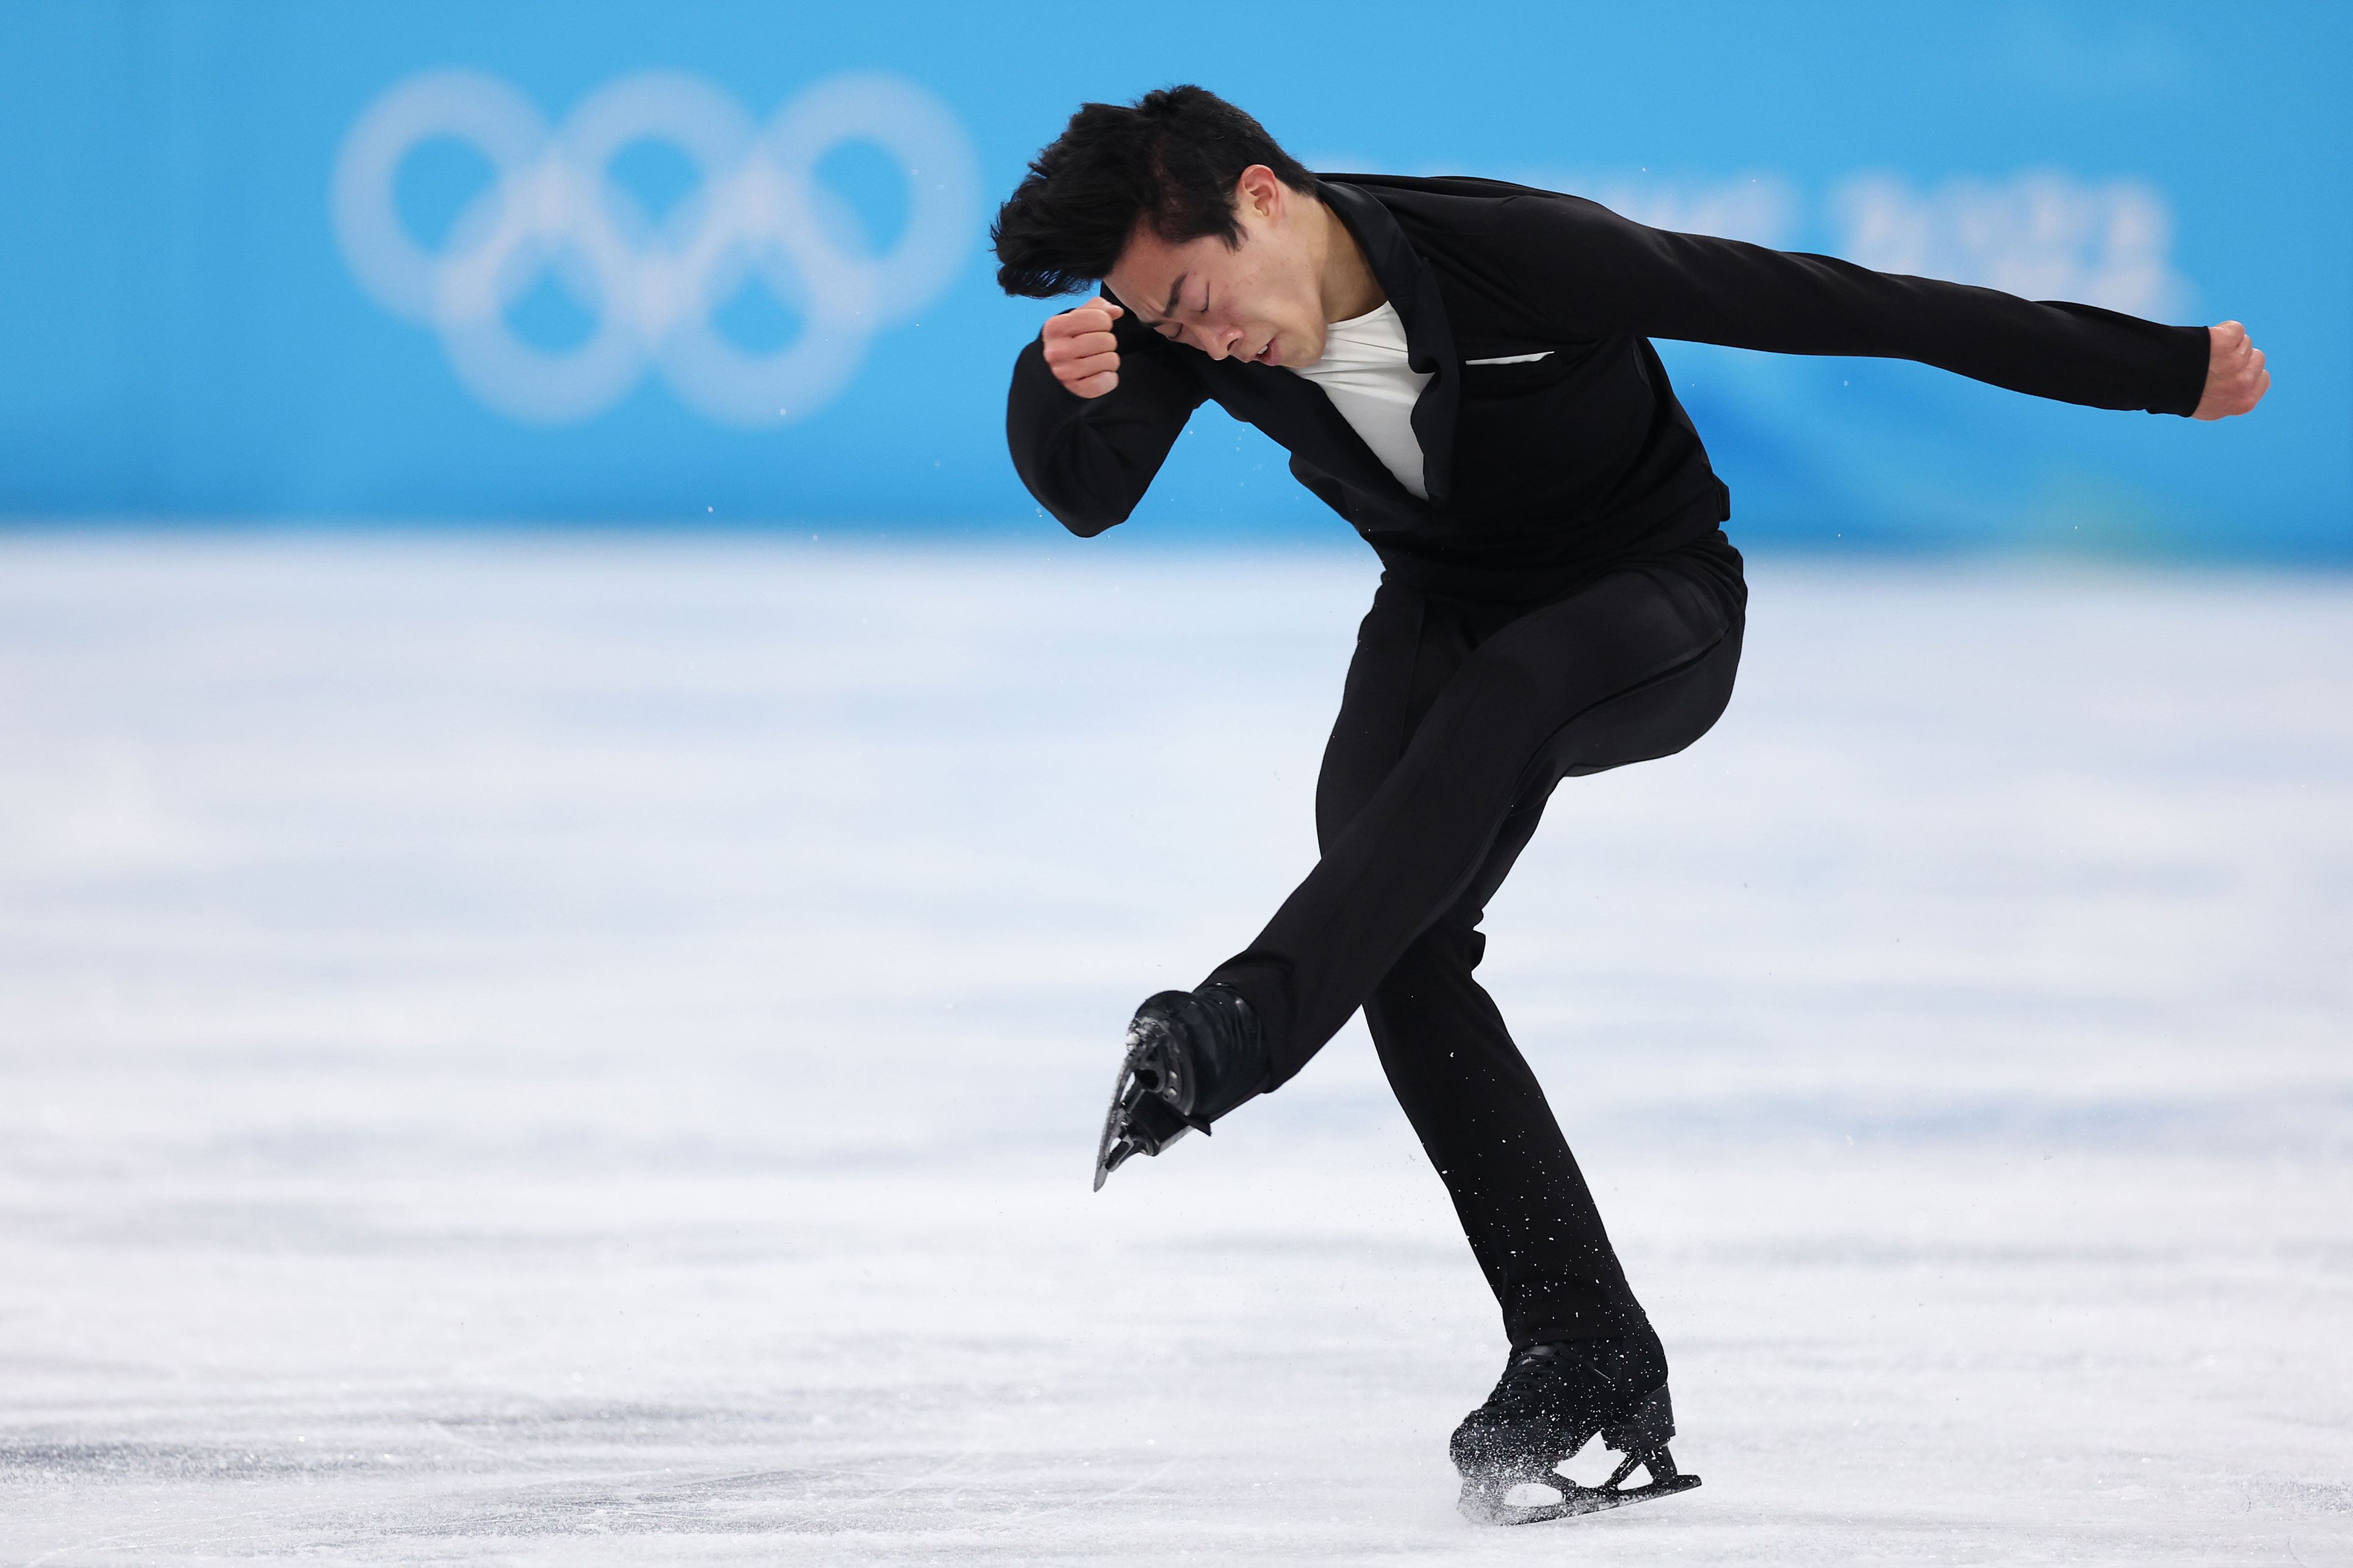 Nathan Chen landed a series of flawless quadruple jumps in the men's single skating short program at the Capital Indoor Stadium on Tuesday.